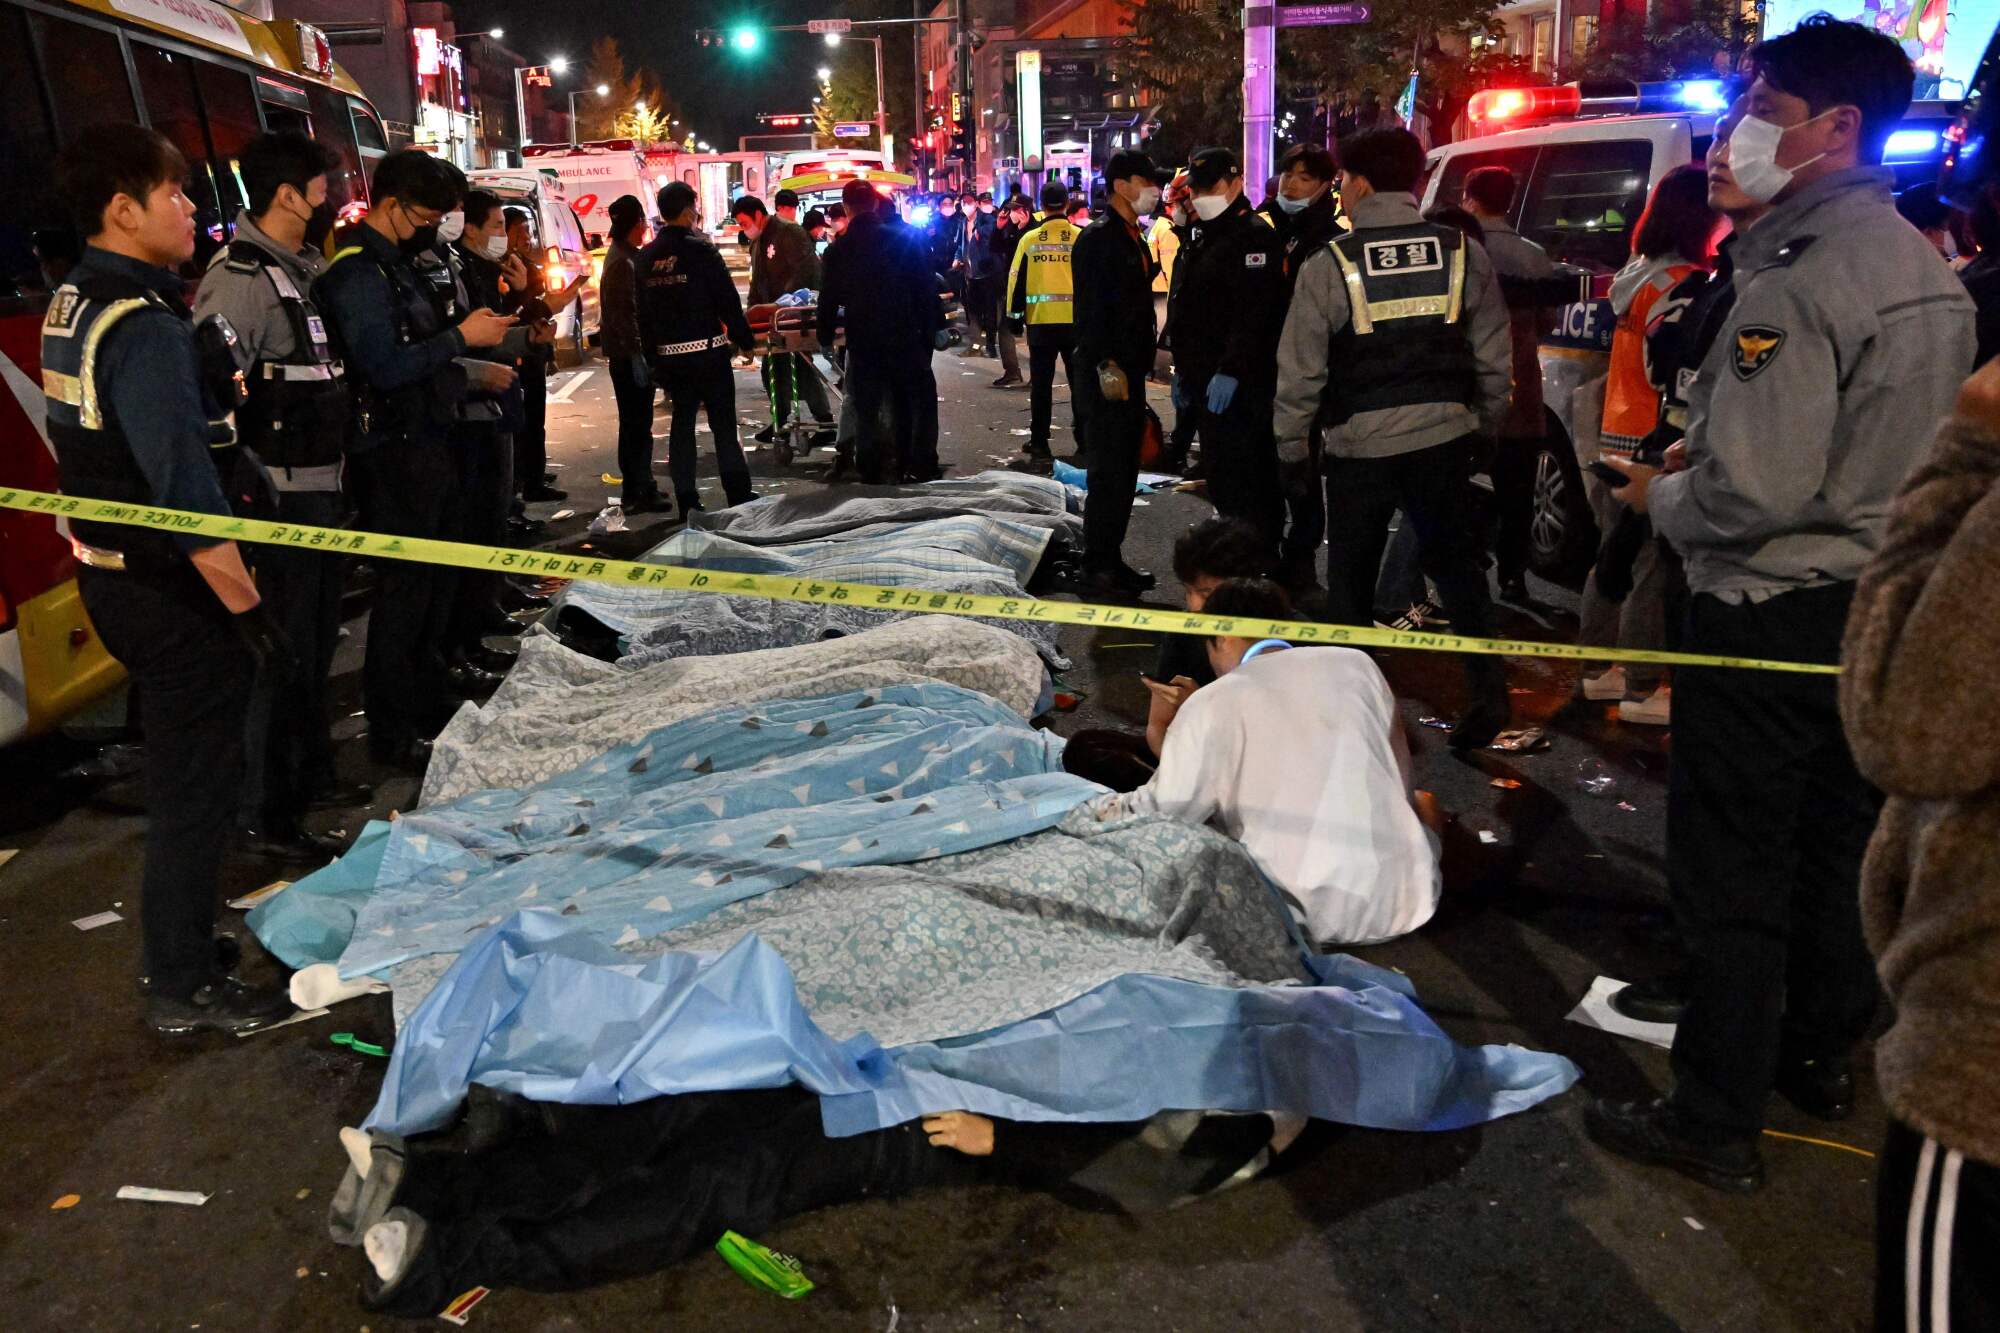 Bodies covered in sheets on a street, surrounded by emergency workers 